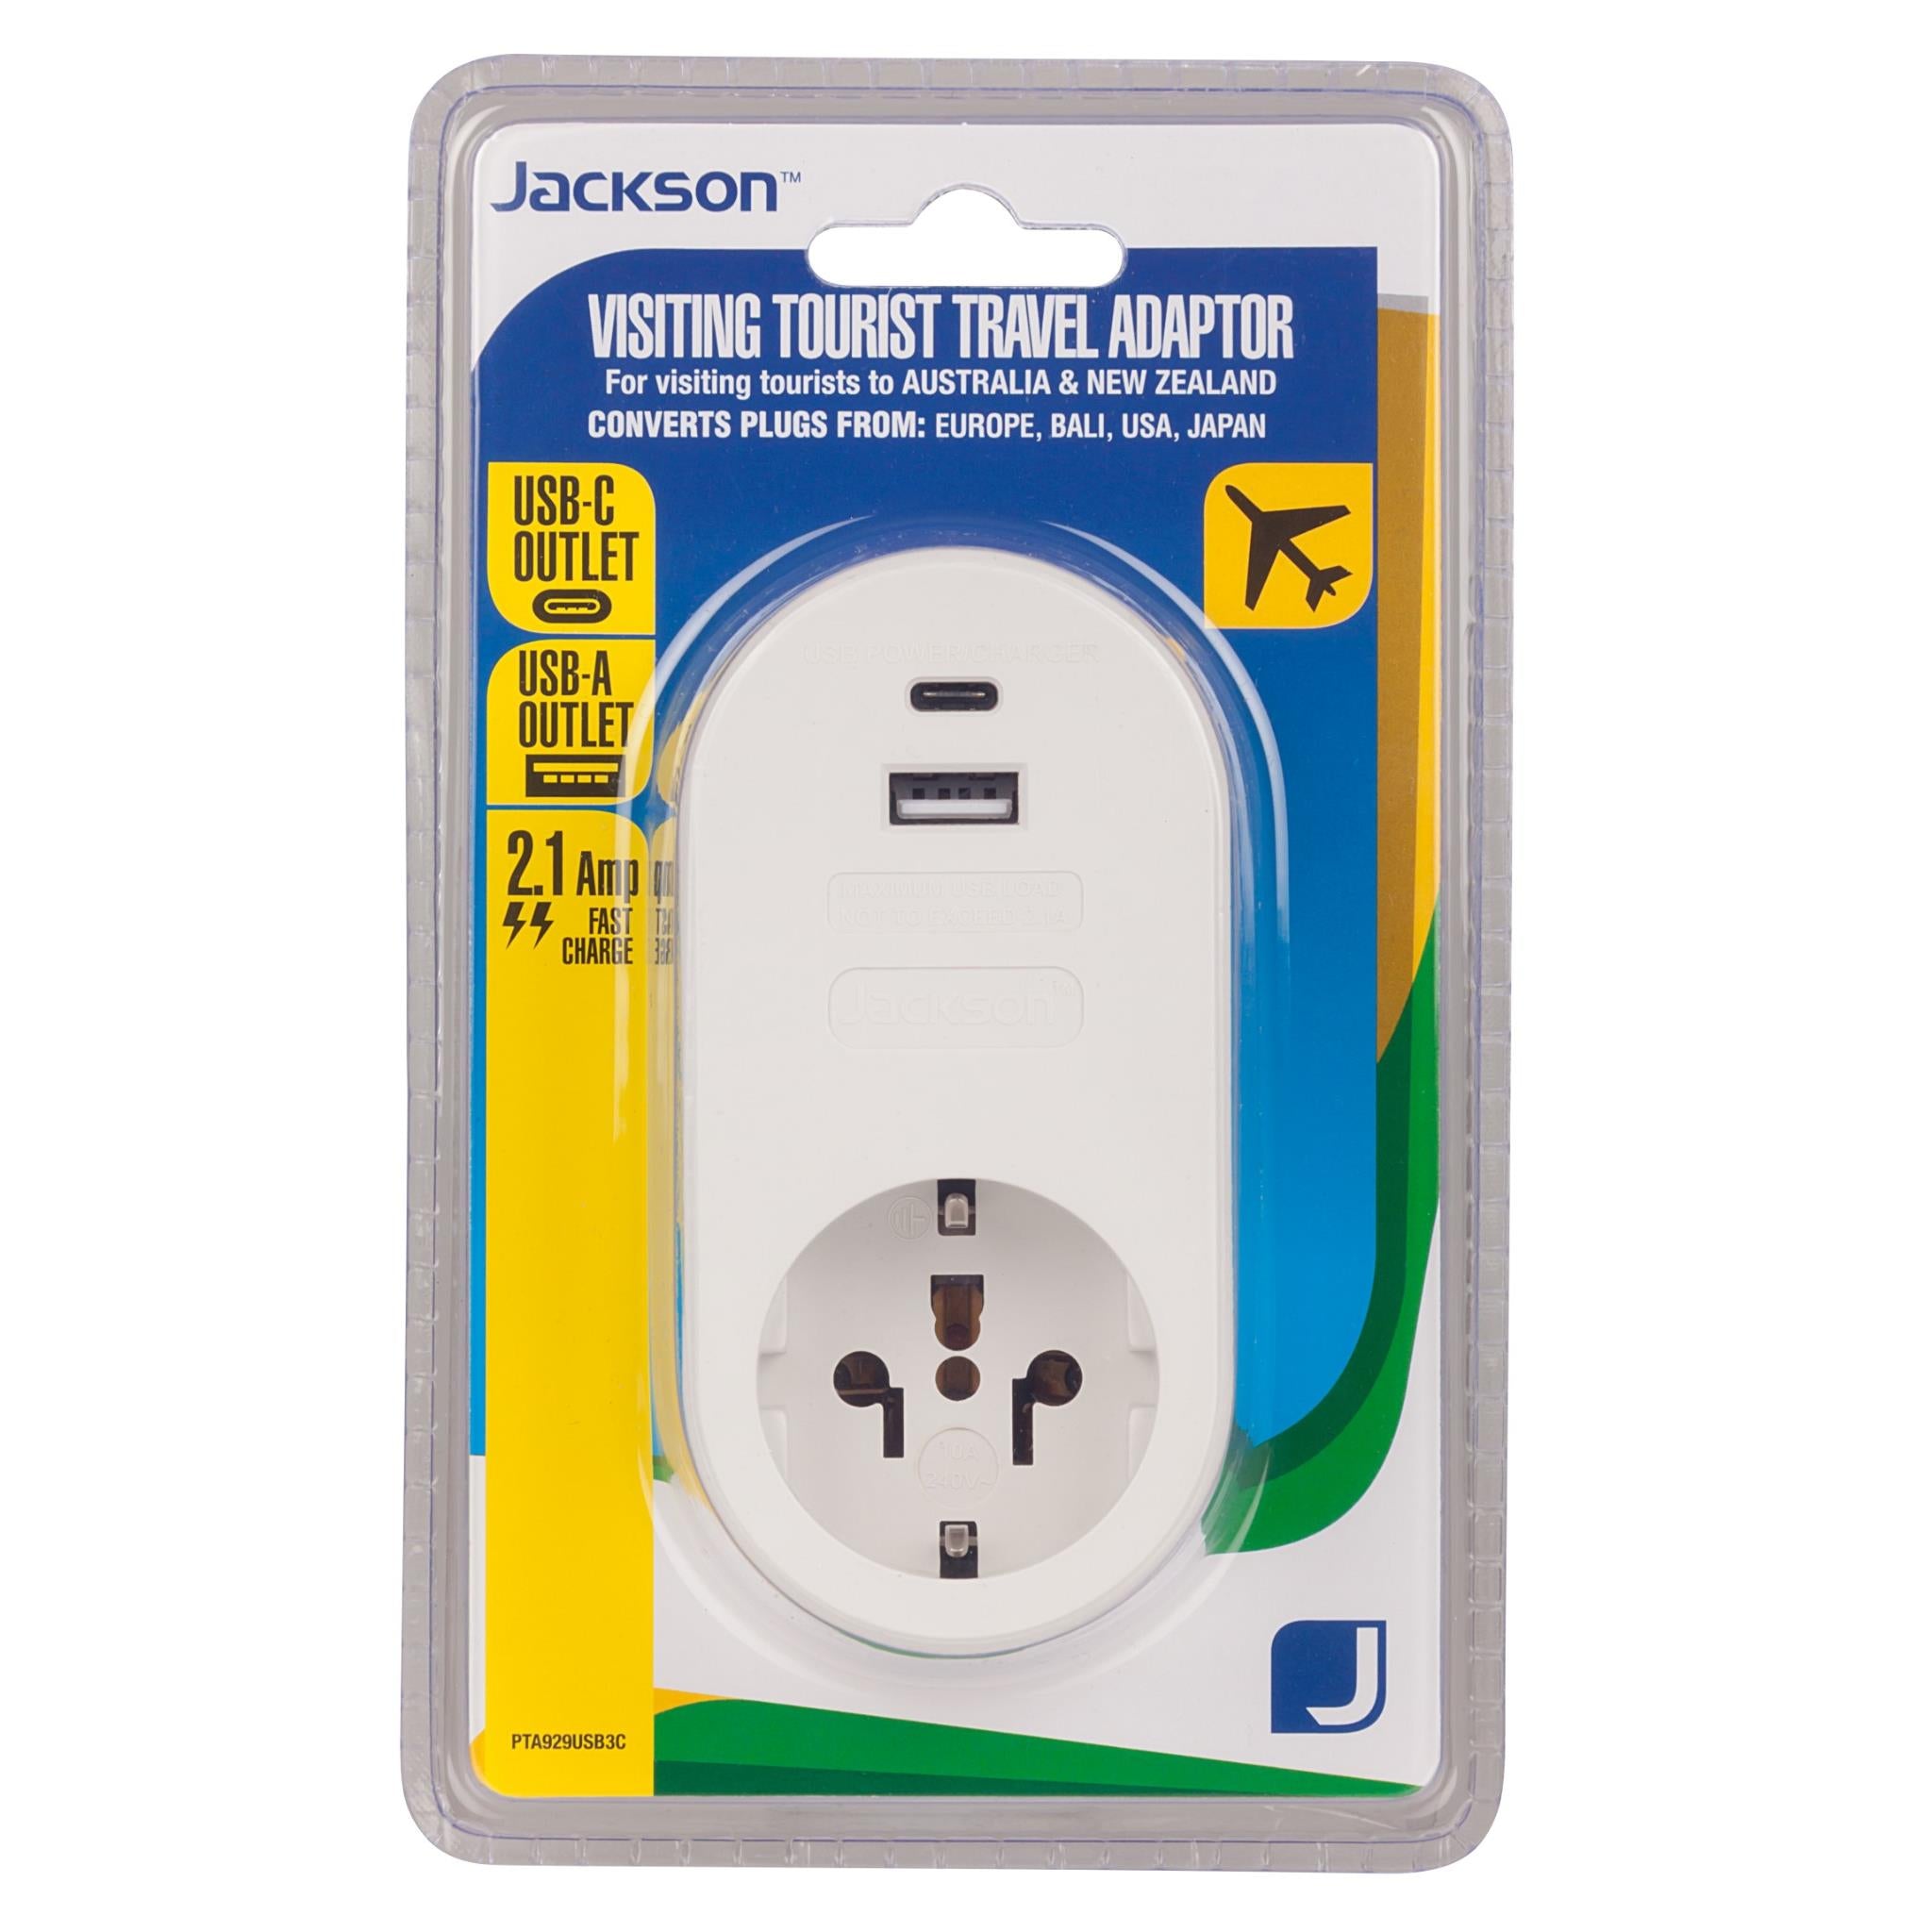 jackson inbound travel adaptor with usb for plugs from europe, bali, usa, japan and more